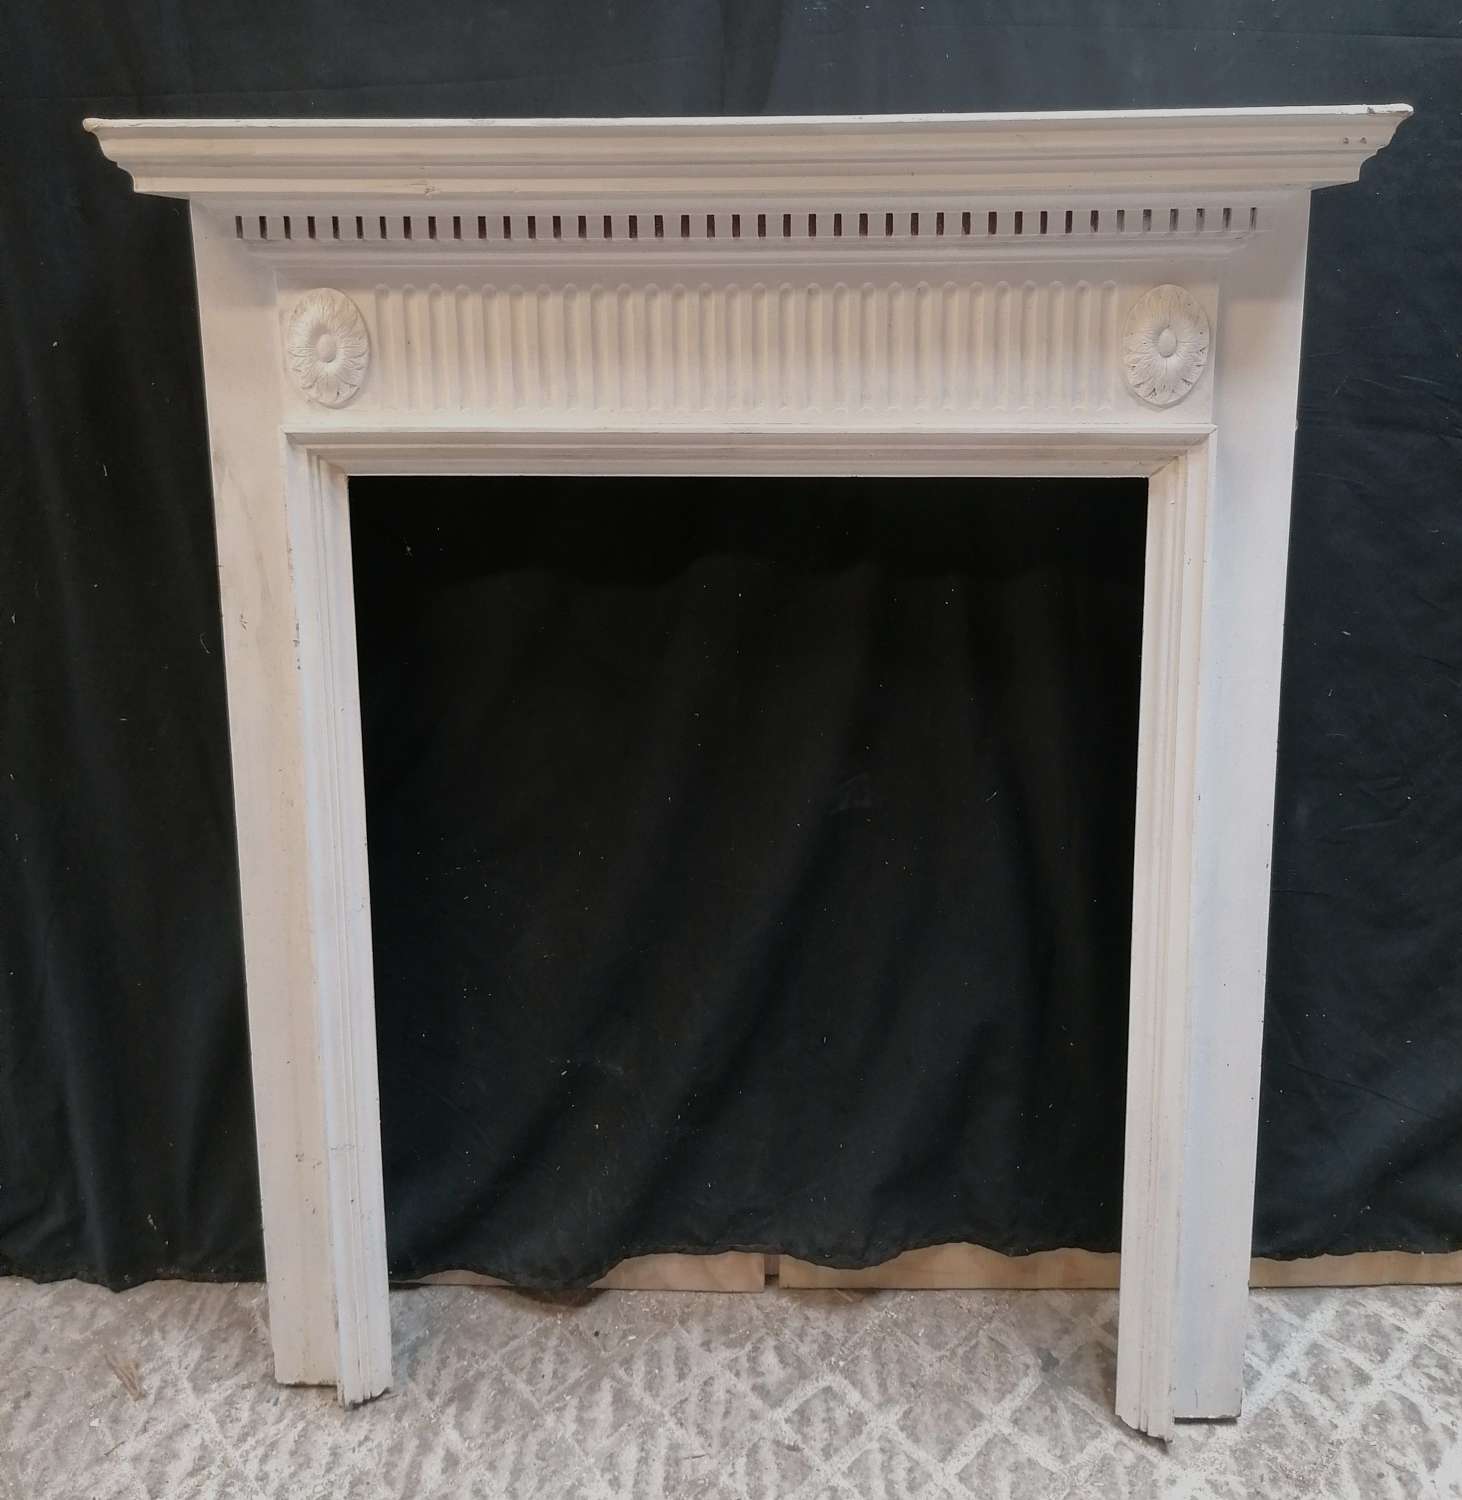 FS0157 A DECORATIVE RECLAIMED PAINTED PINE FIRE SURROUND